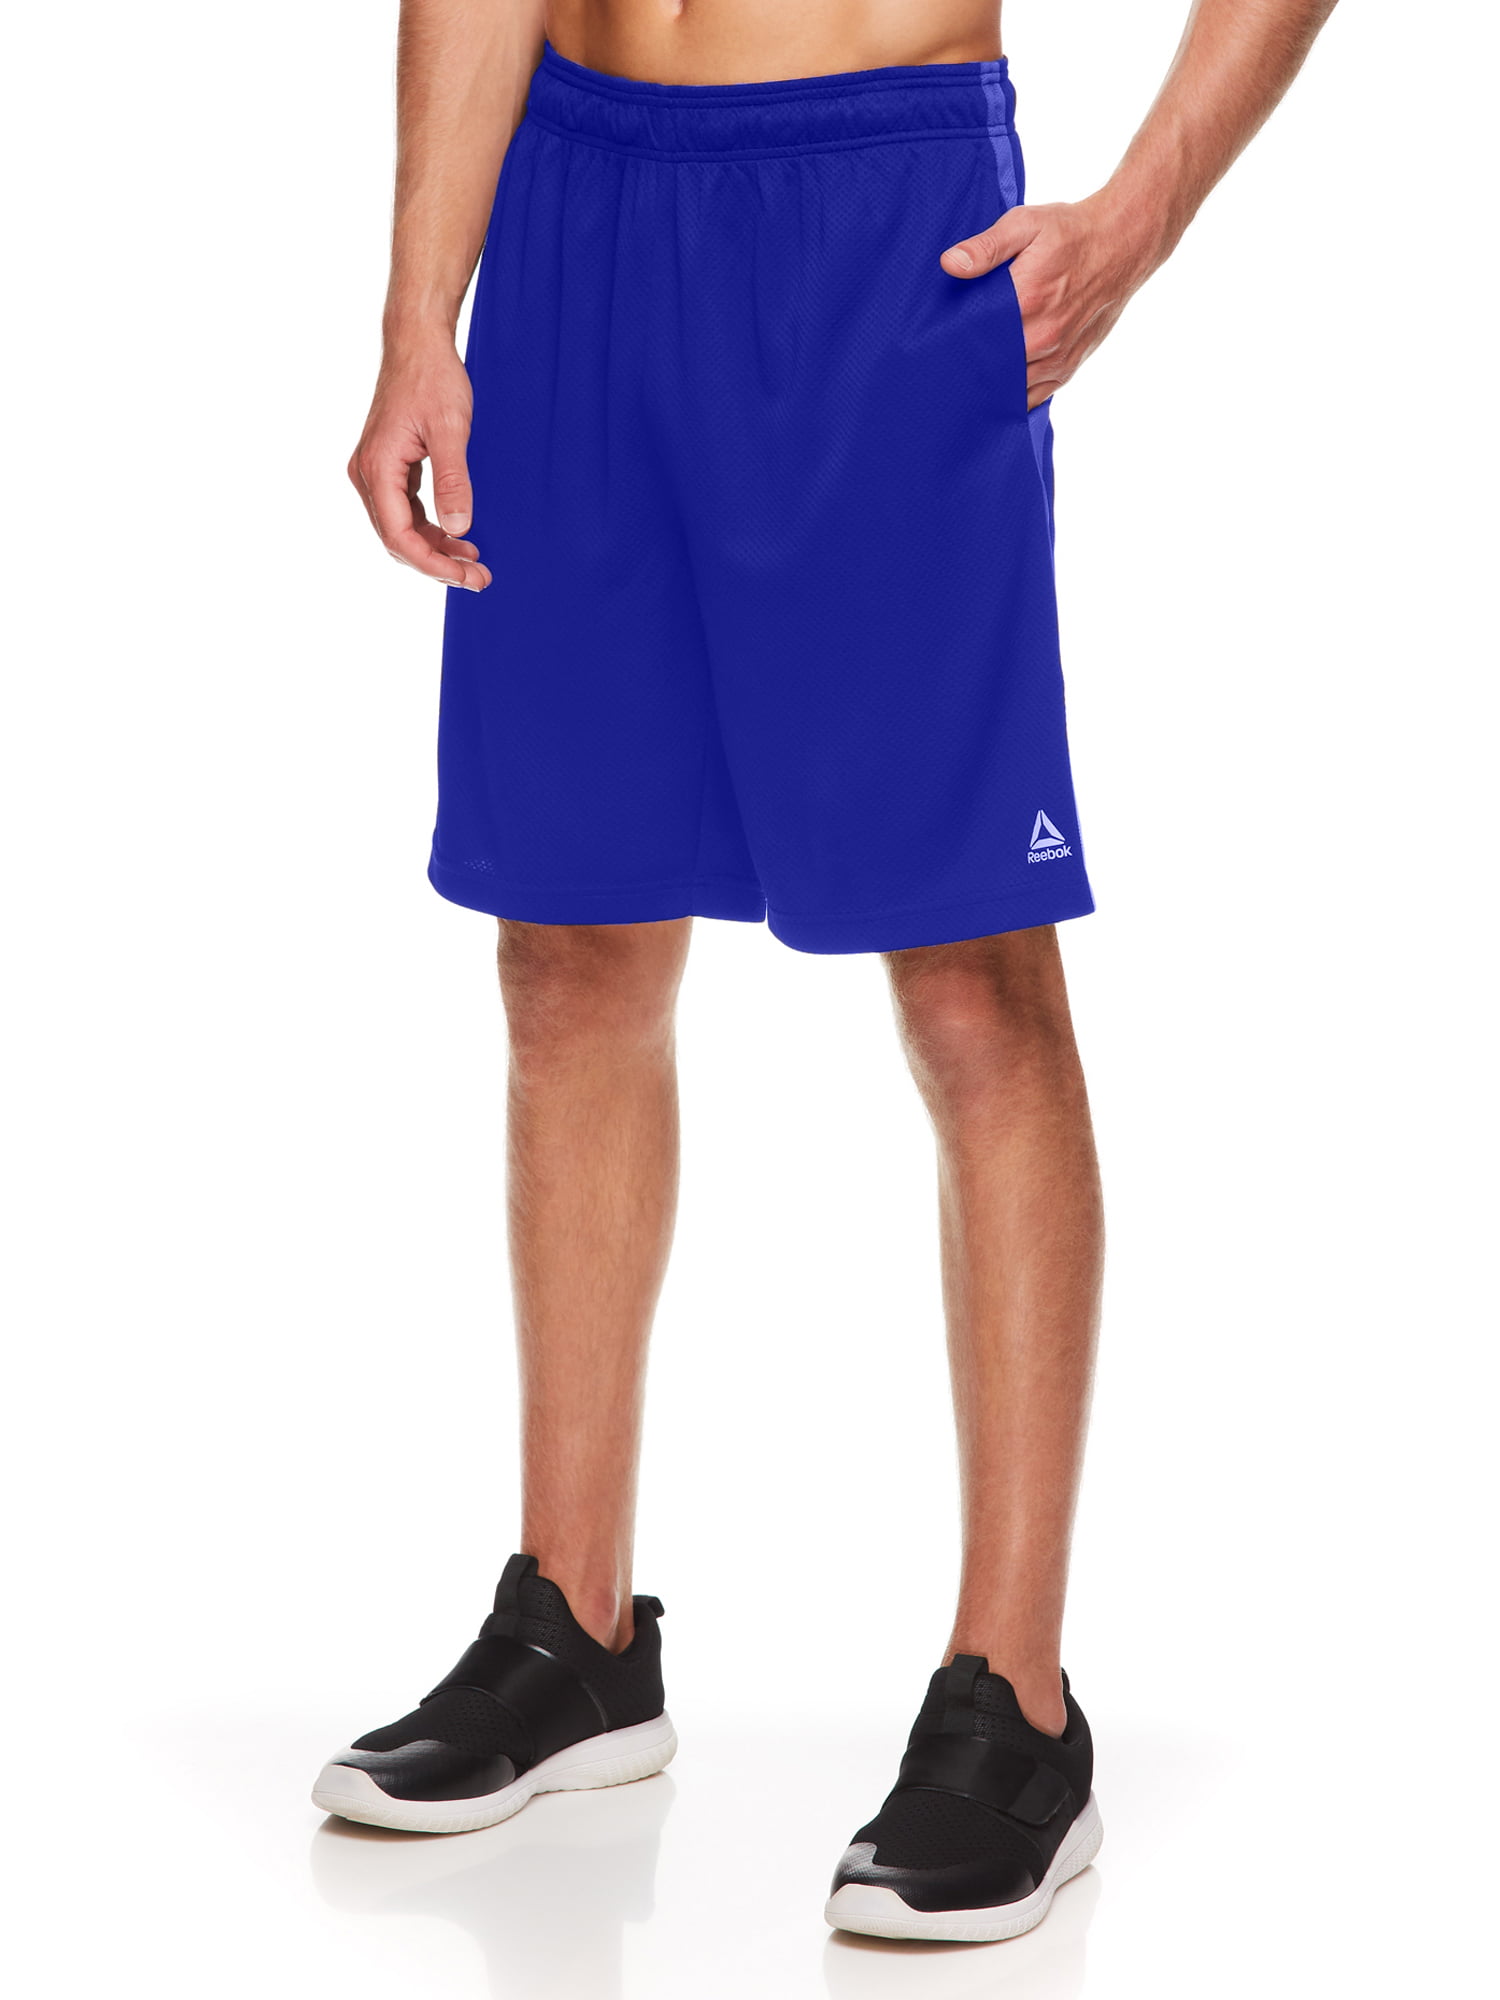 Reebok Boys 3-Piece Athletic Sports Performance Quick Dry Short Set with T-Shirt and Shorts